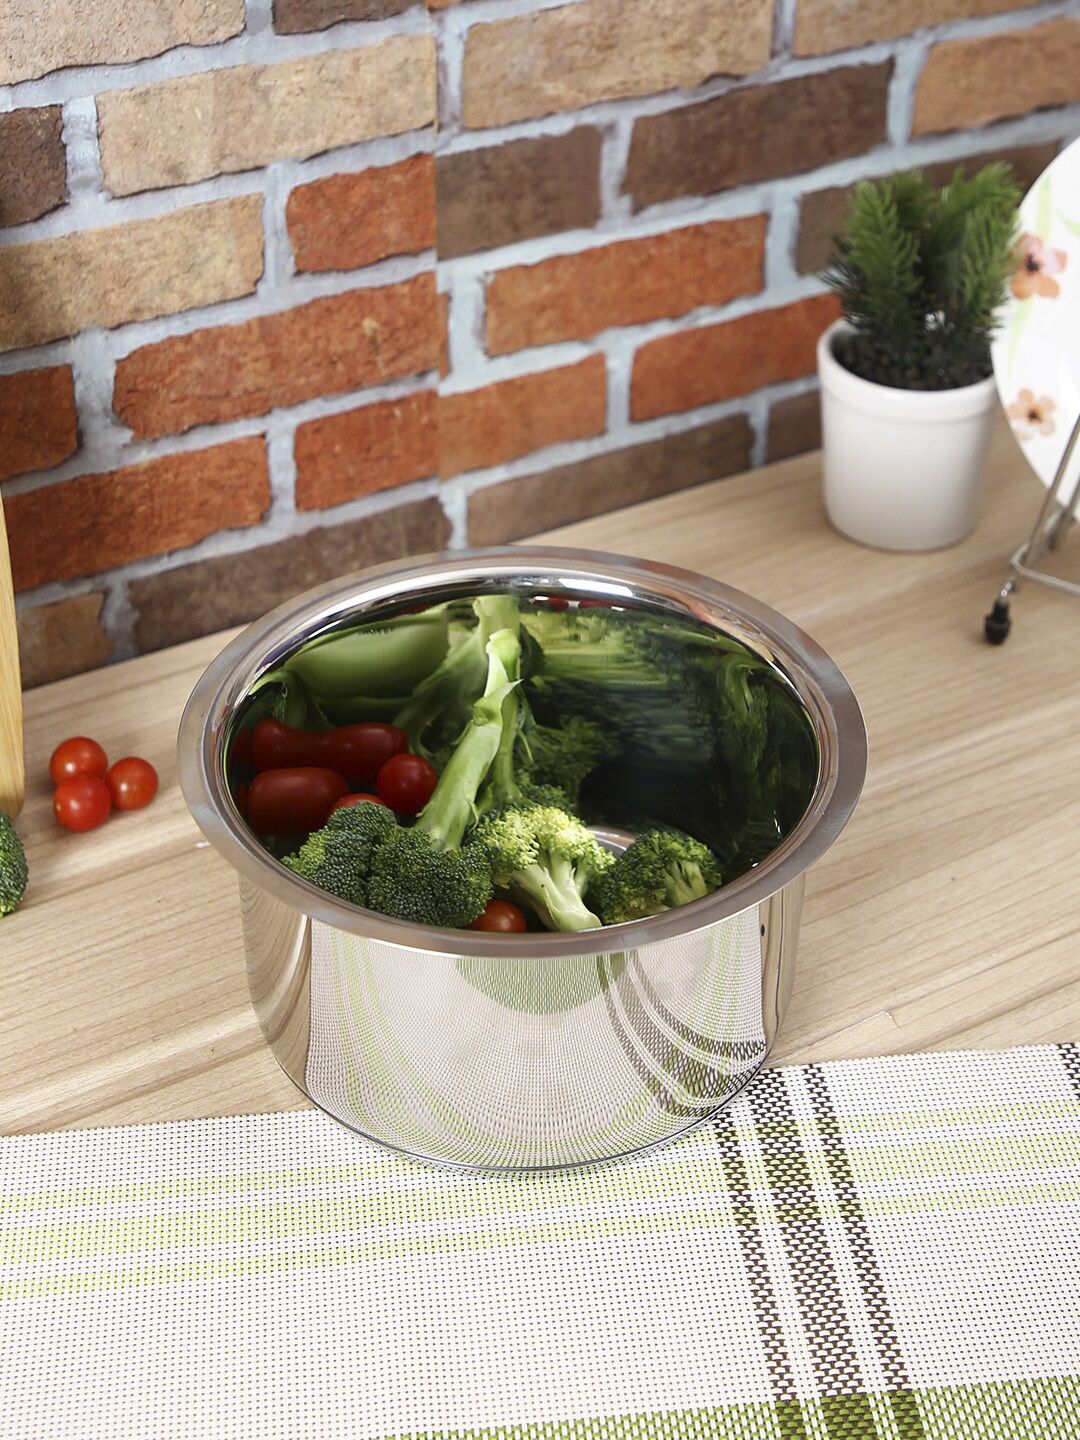 AURUM Silver-Toned Stainless Steel Stew Pot Price in India